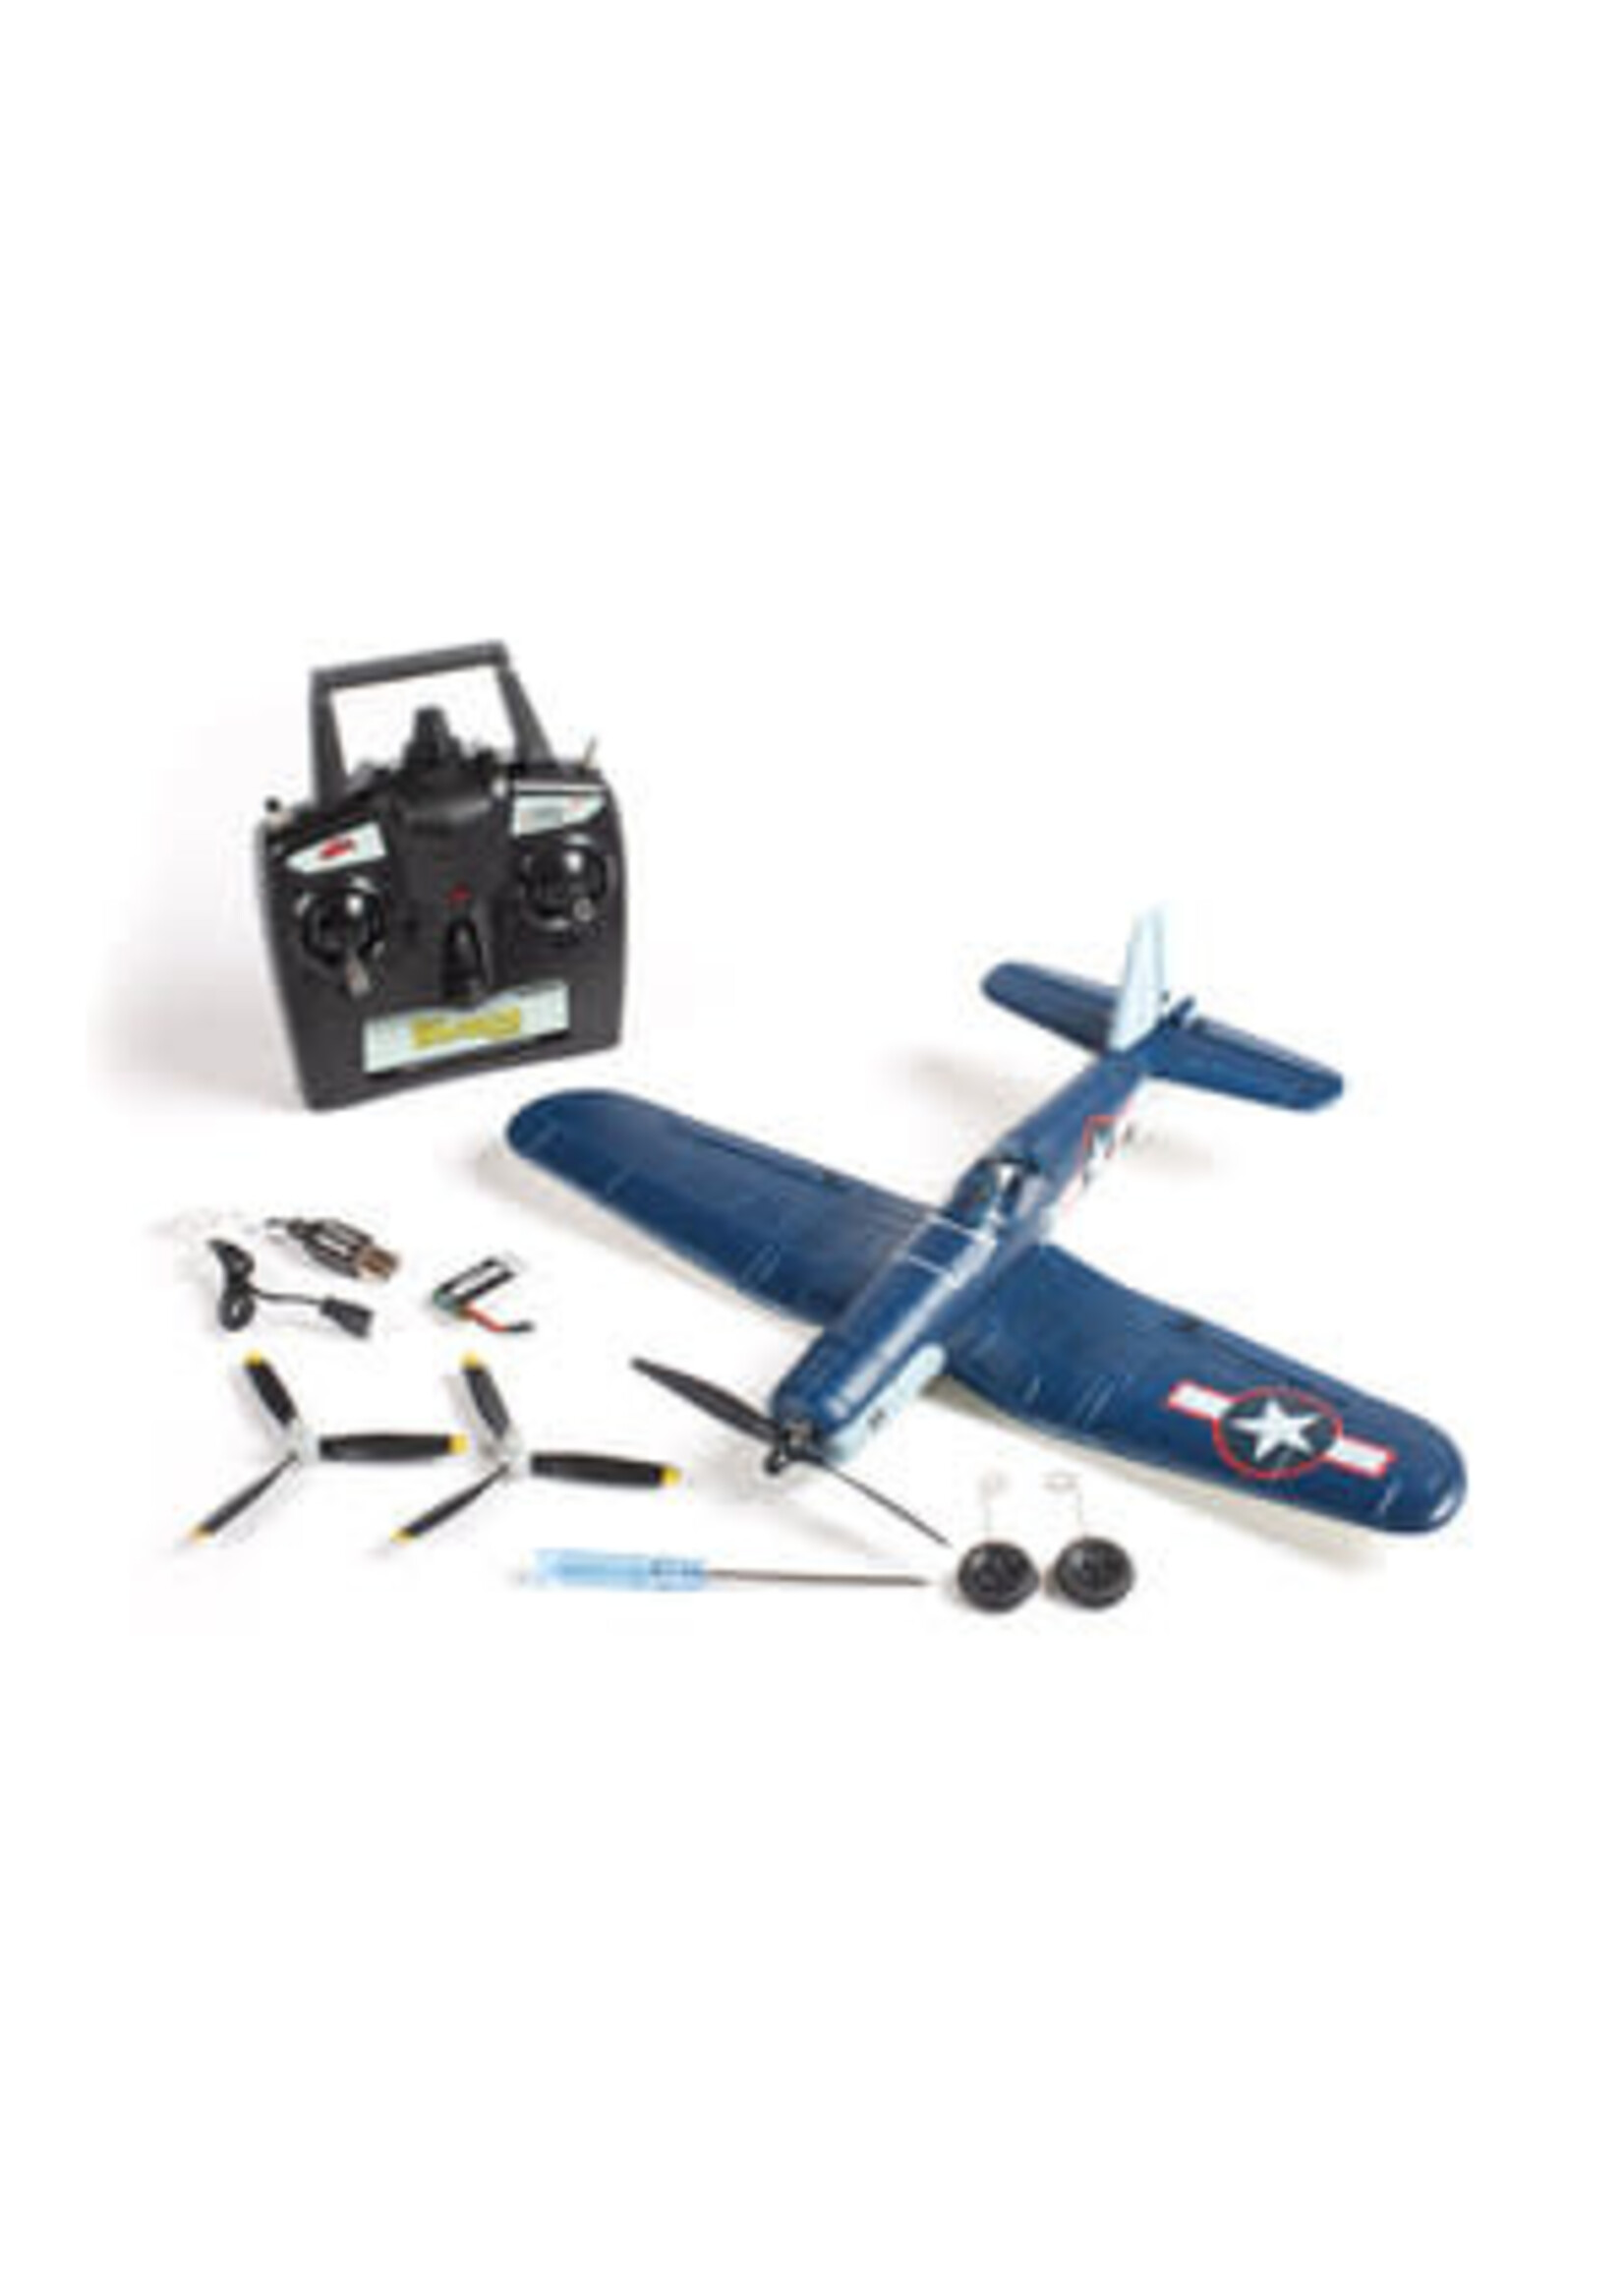 Rage rc RGRA1301V2 F4U Corsair Jolly Rogers Micro RTF Airplane with PASS (Pilot Assist Stability Software) System